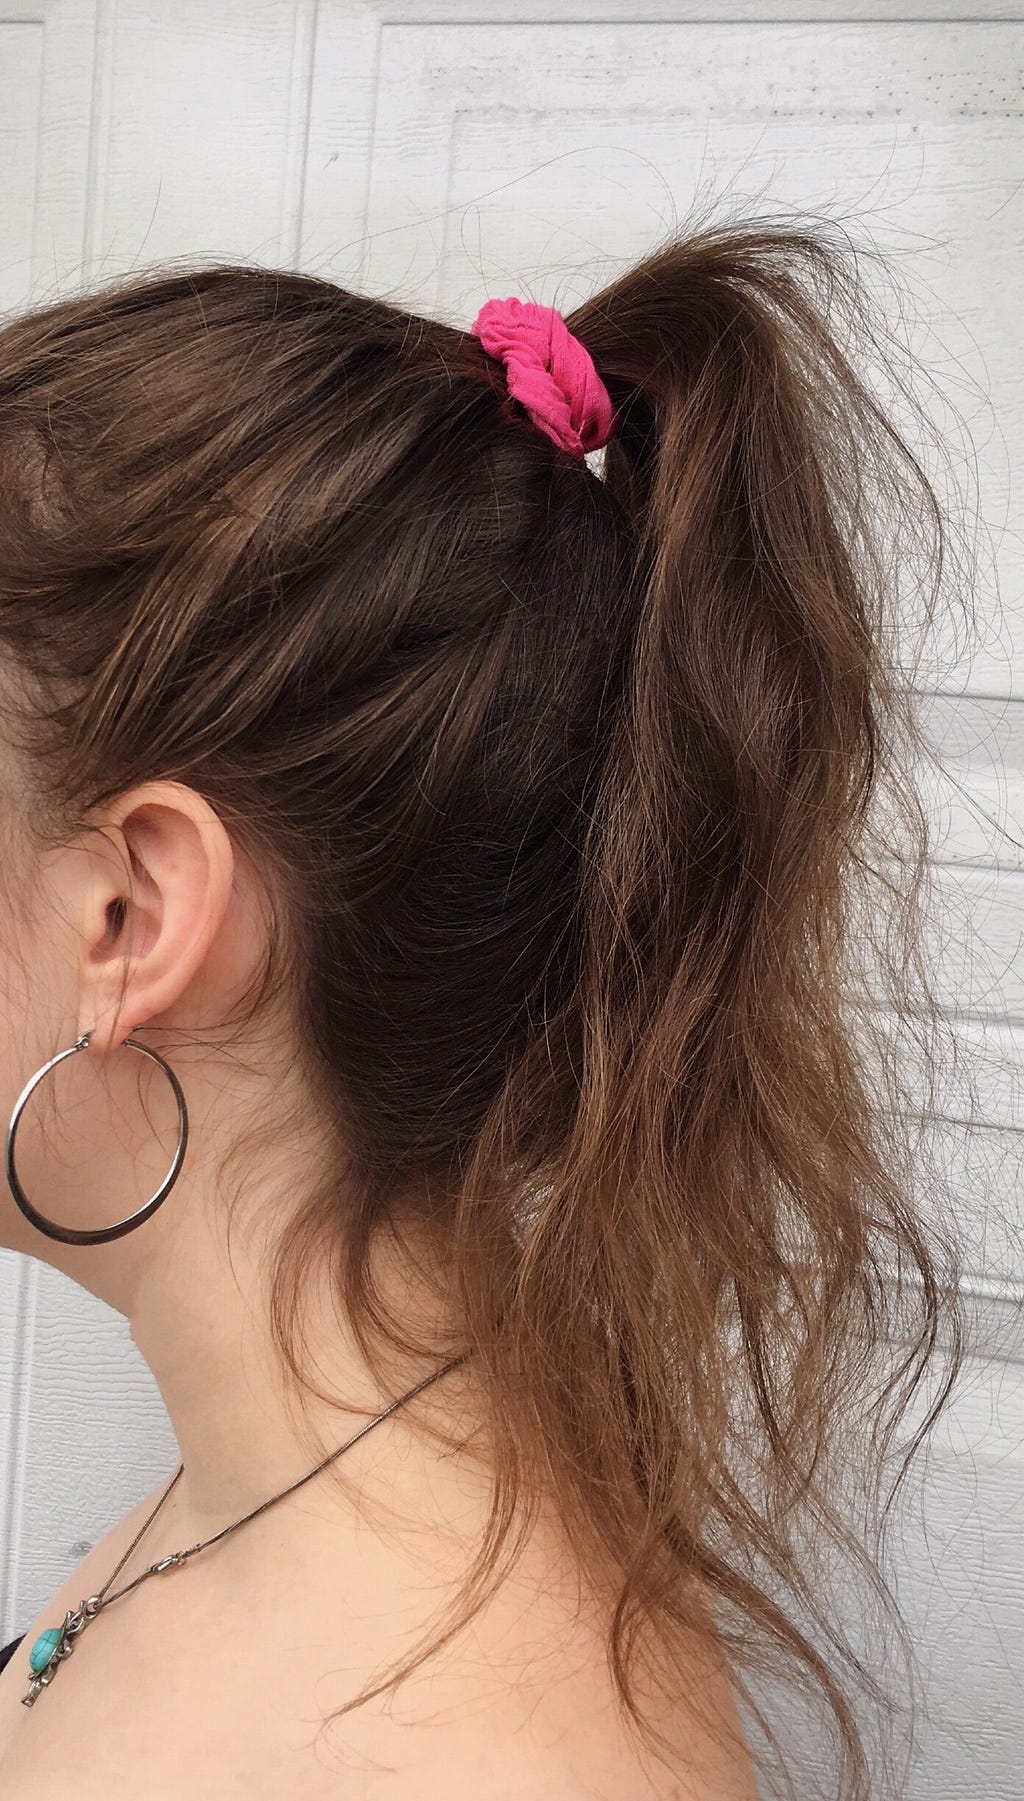 Me wearing a small pink scrunchie in my hair in a high ponytail.